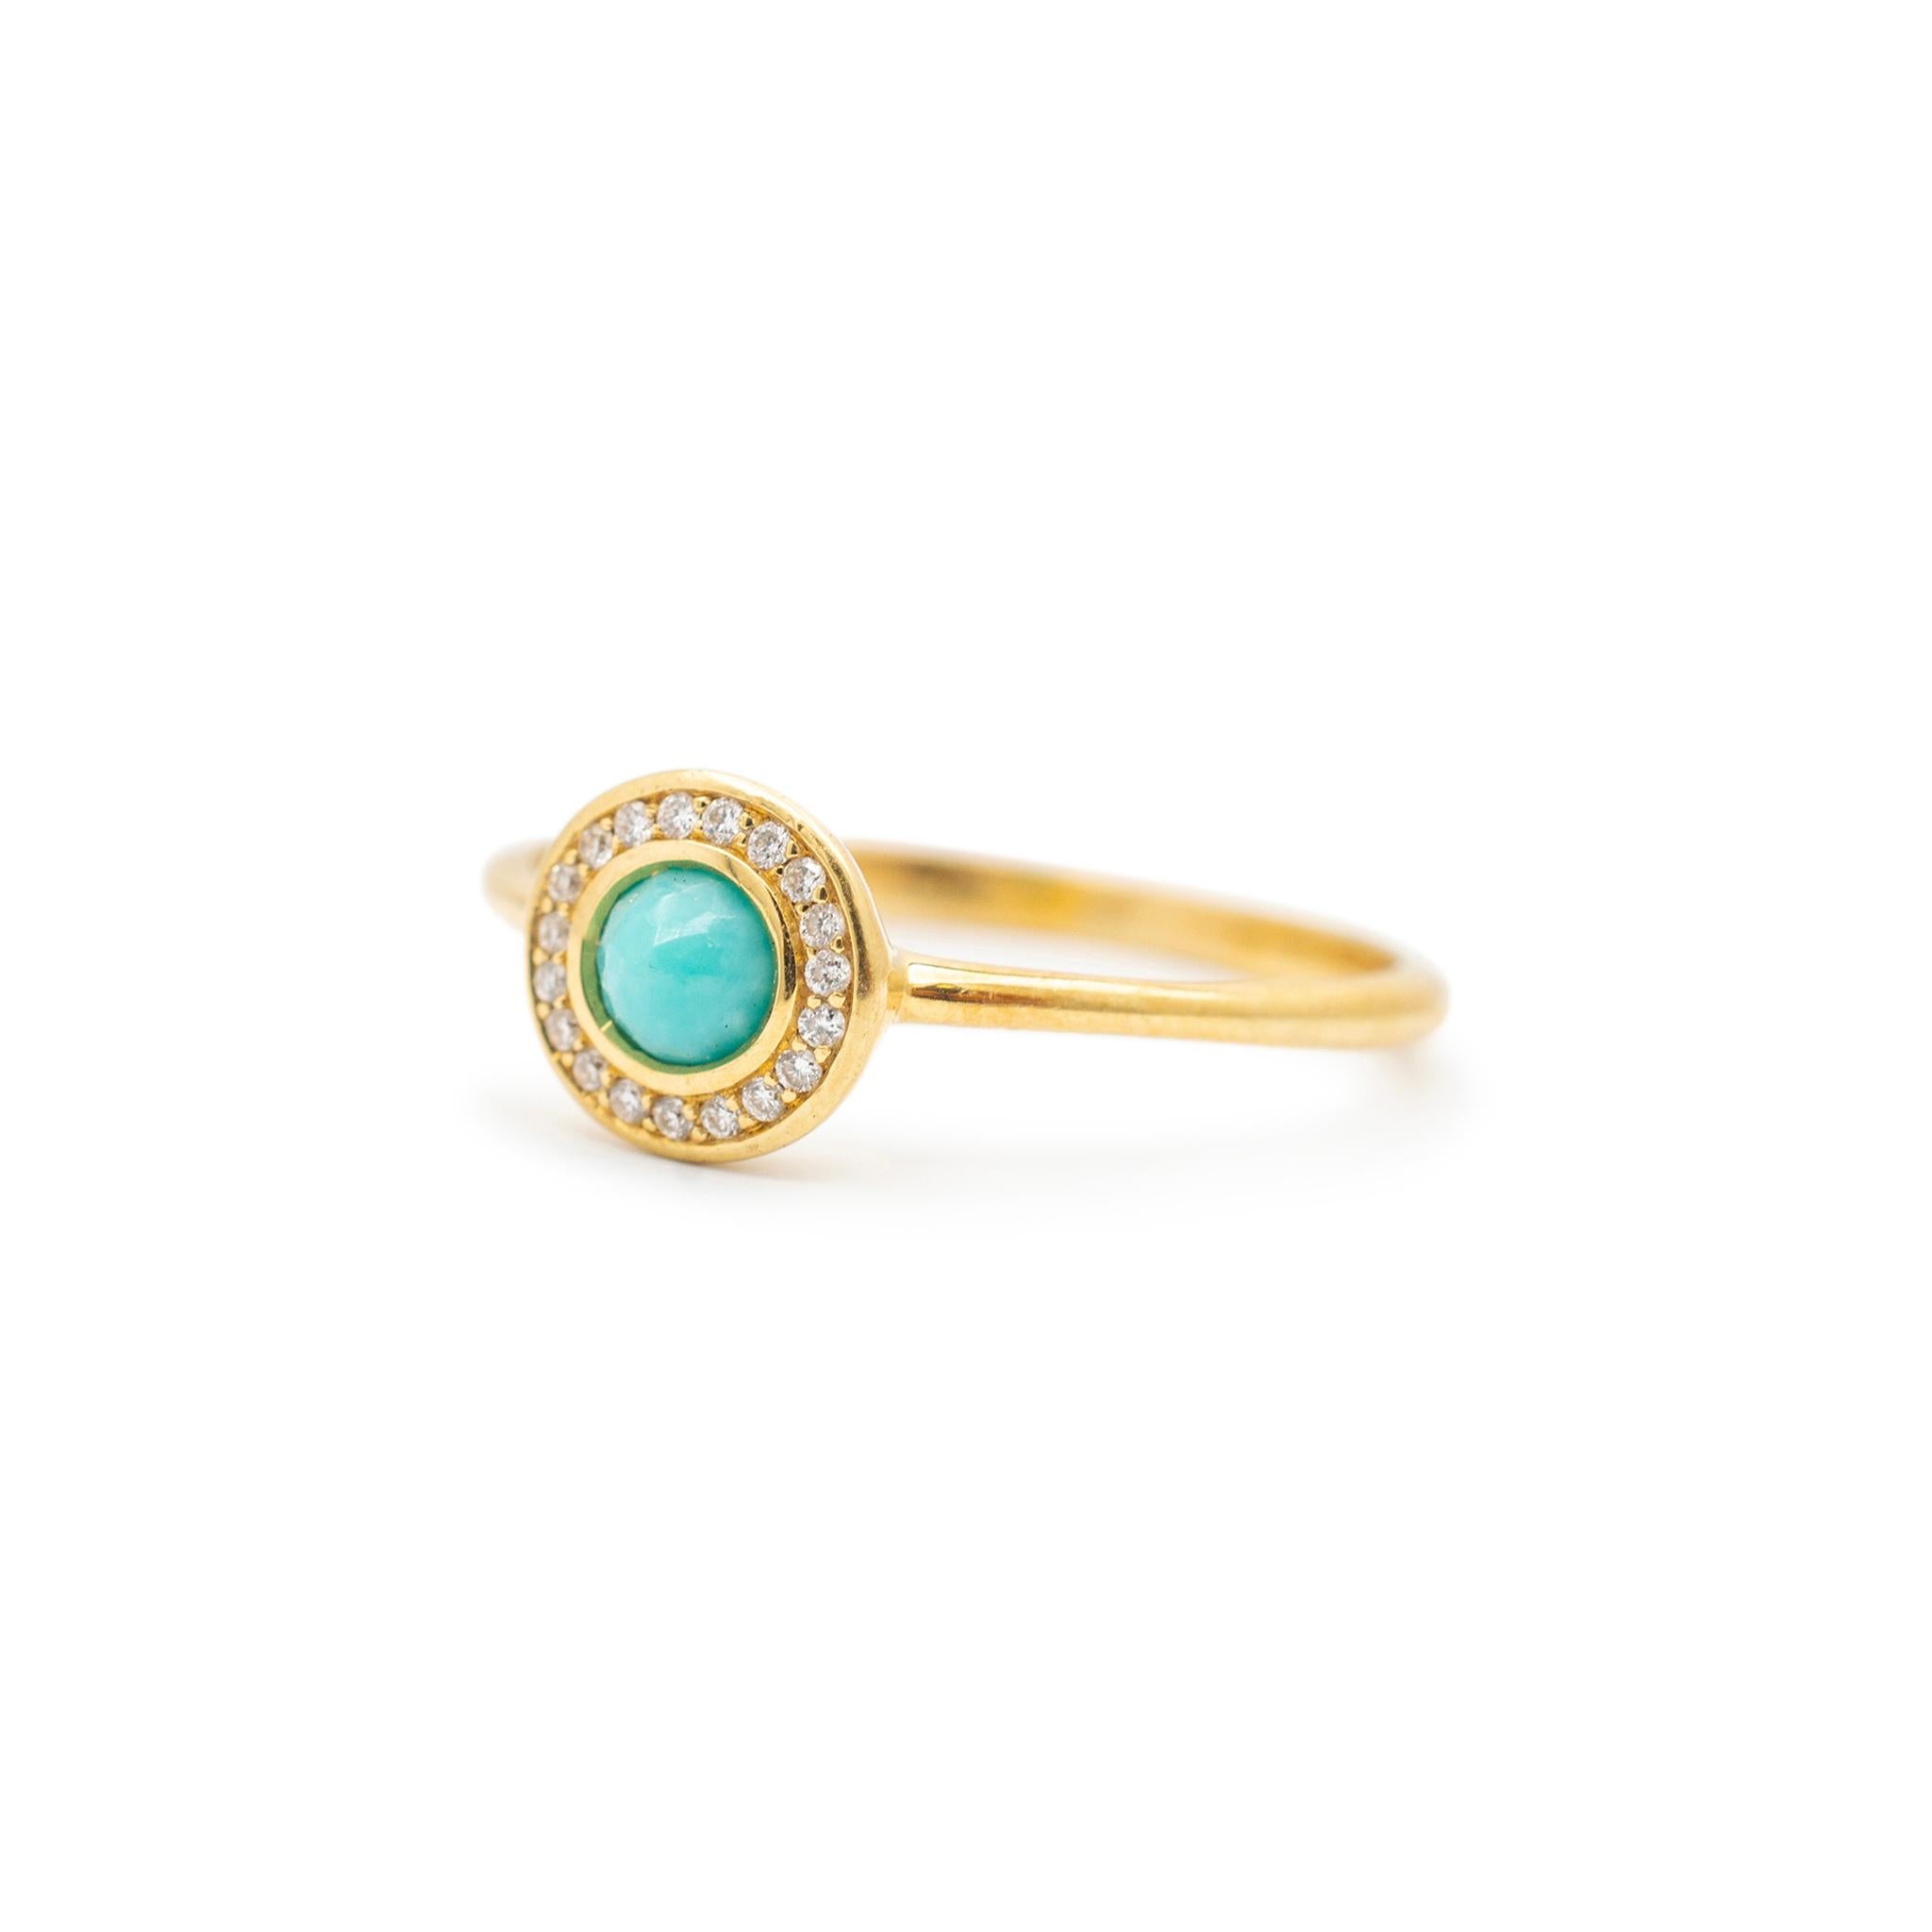 Brand: Ippolita

Gender: Ladies

Size: 7

Head measurements: 7.30mm x 7.60mm

Shank maximum width: 1.75mm

Weight: 2.10 grams

Ladies Ippolita 18K yellow gold diamond and tourmaline halo, cocktail ring with a half round shank. Engraved with 